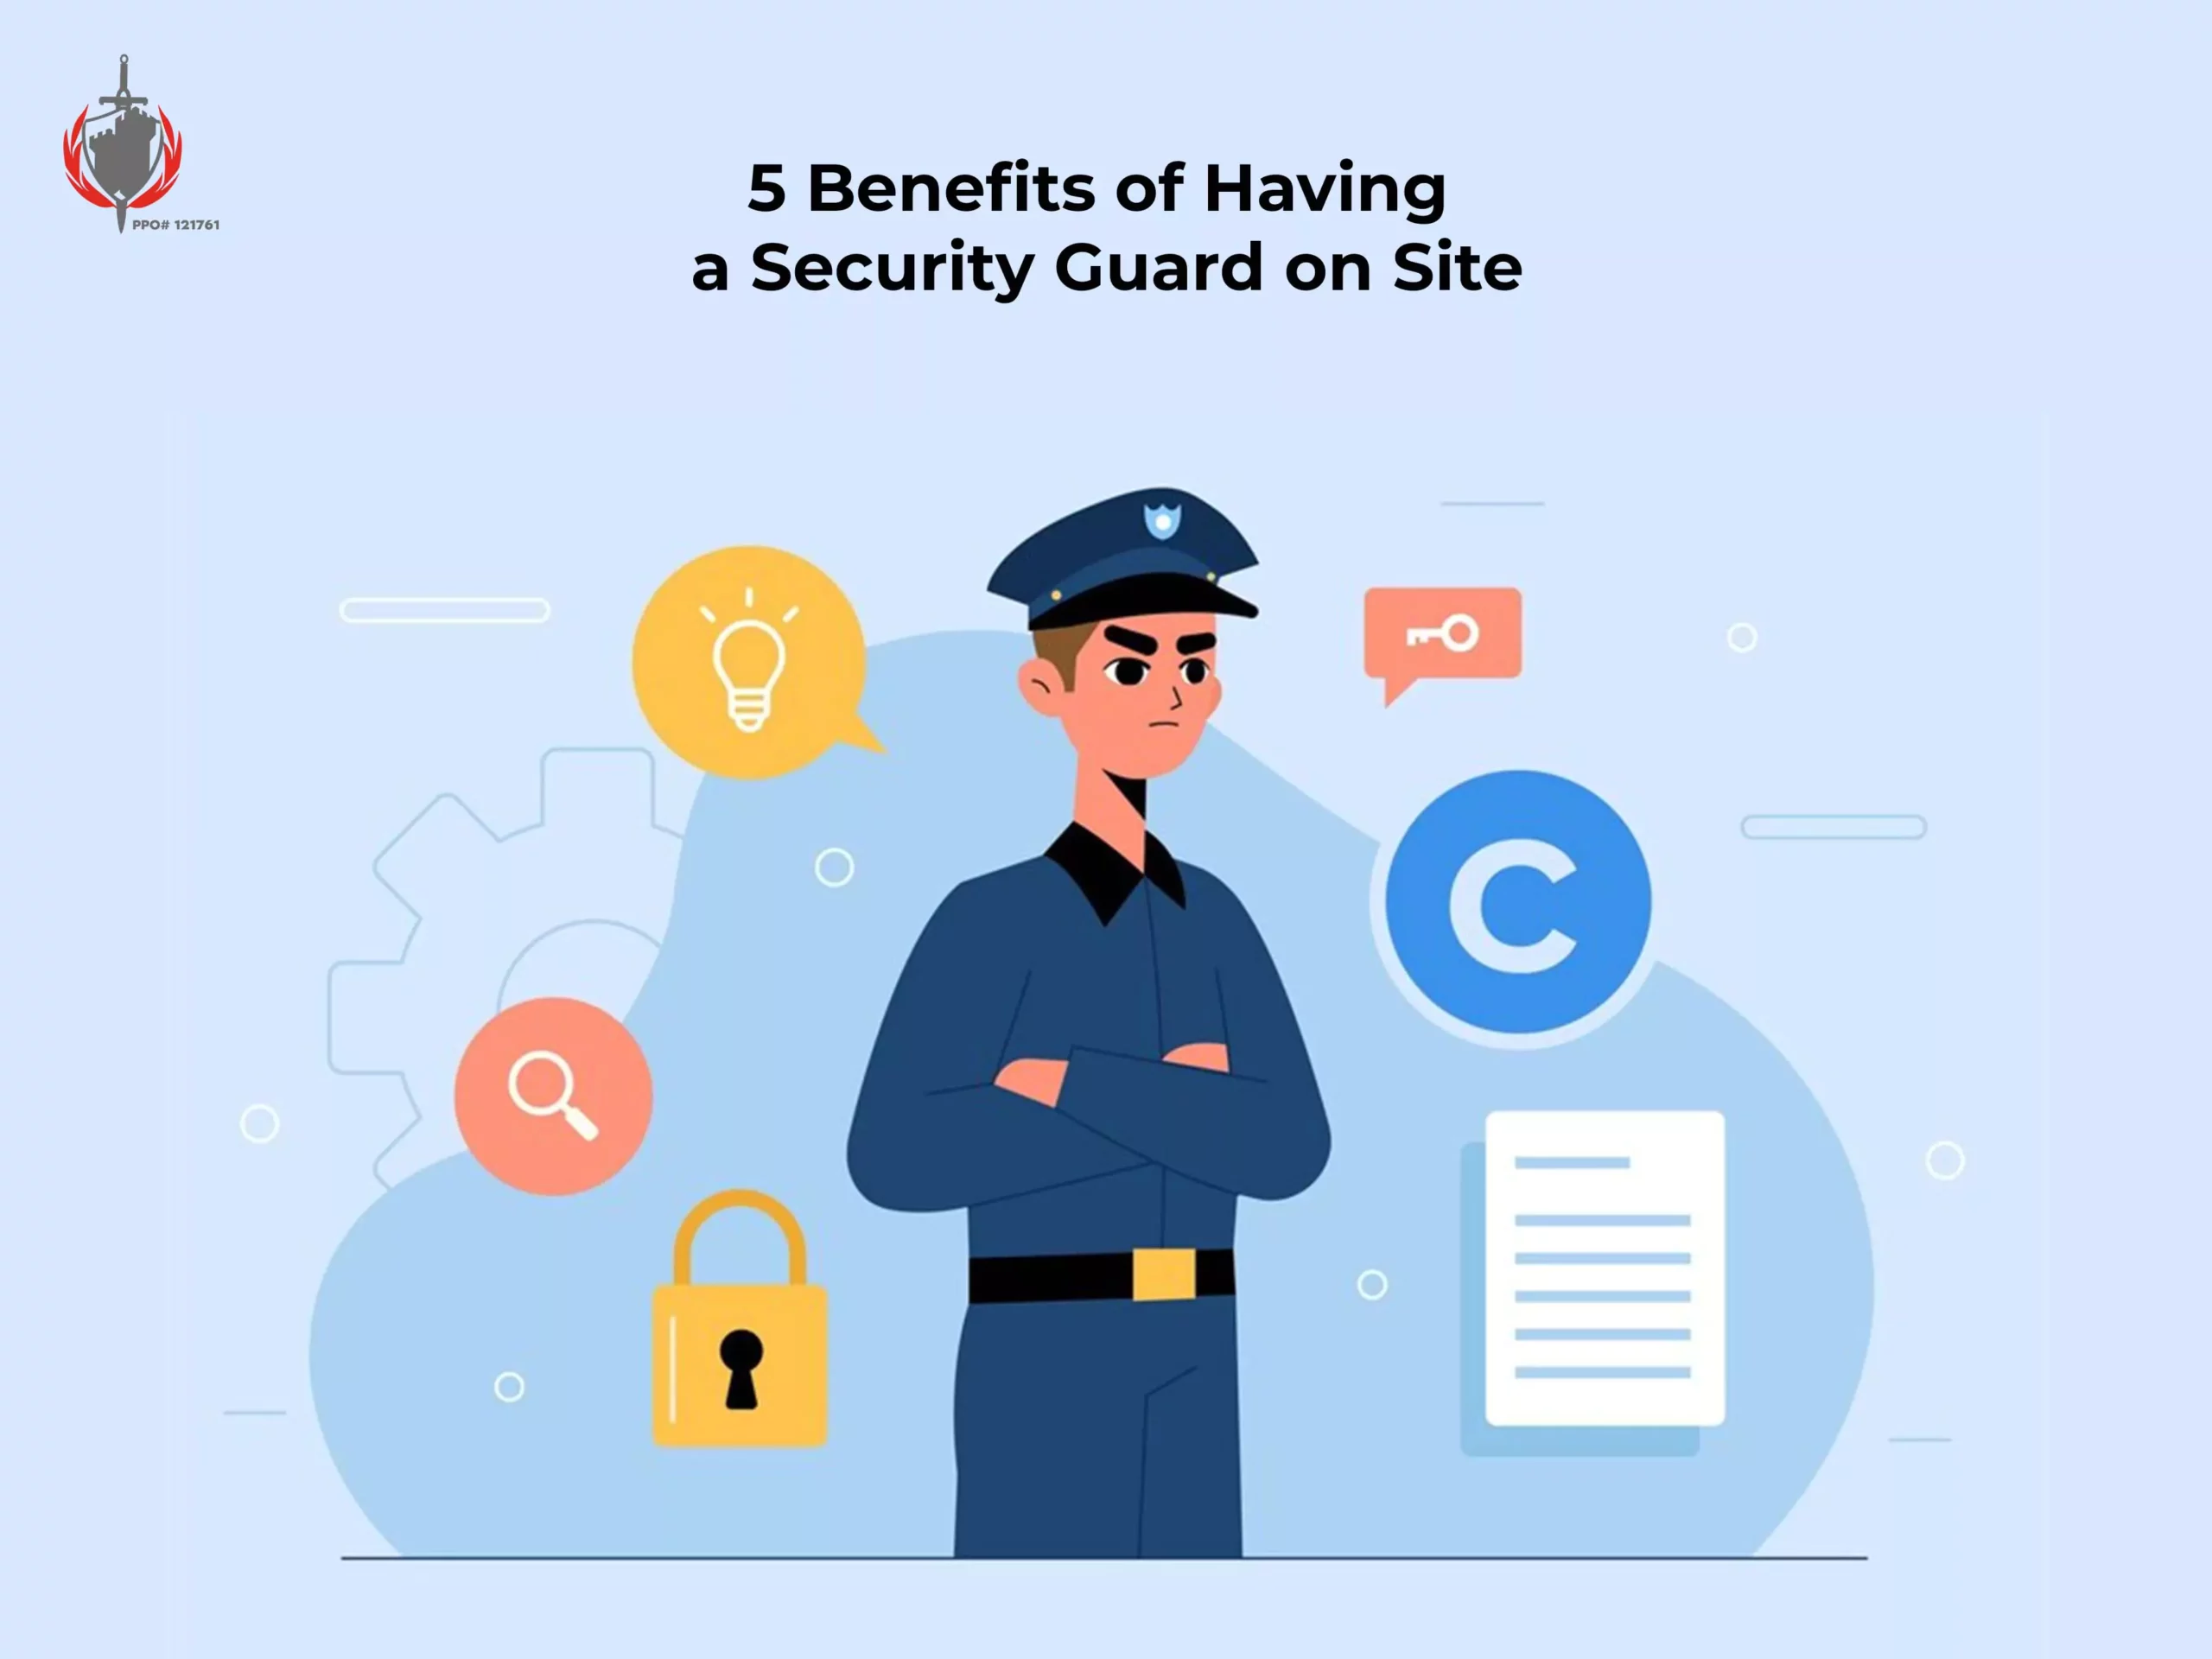 5 Benefits of Having a Security Guard on Site